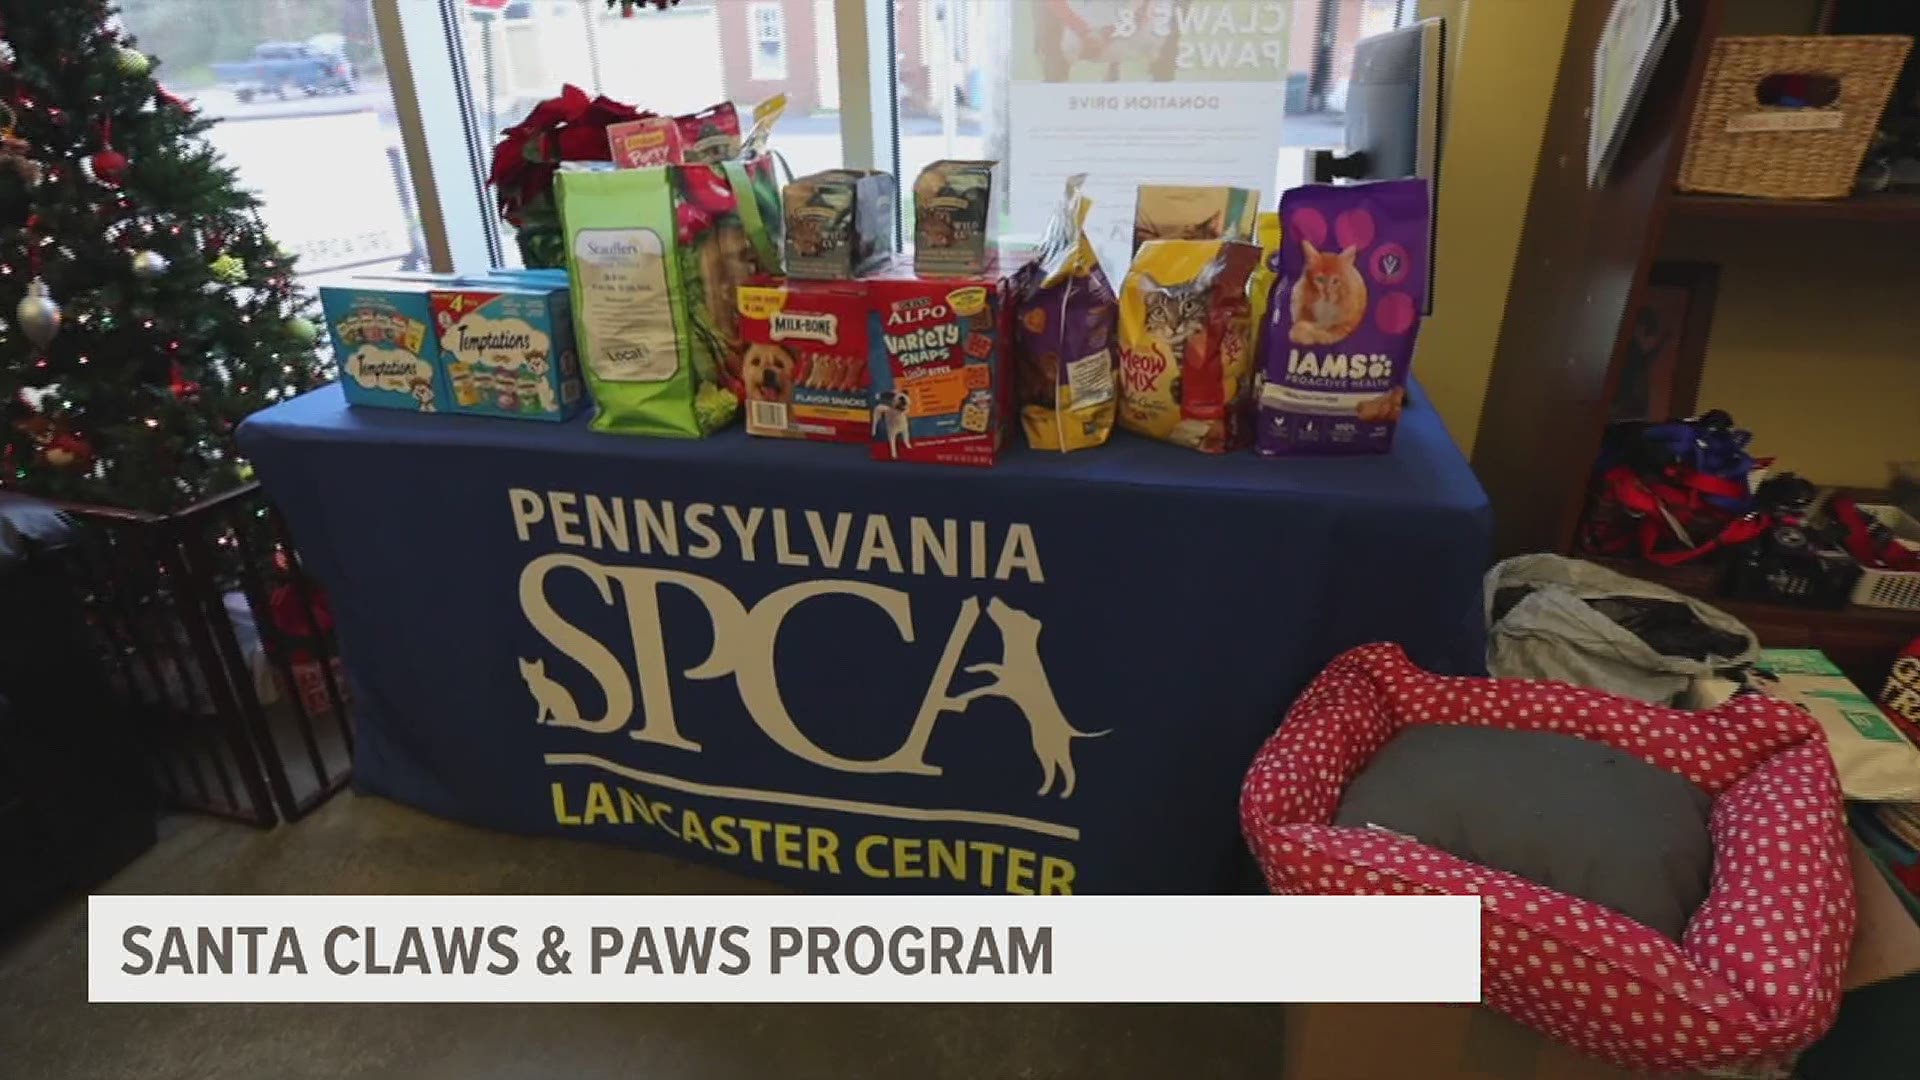 During the holiday season, more people than ever are in need of pet supplies. PSPCA Lancaster Center is asking for donations to their holiday fundraiser.